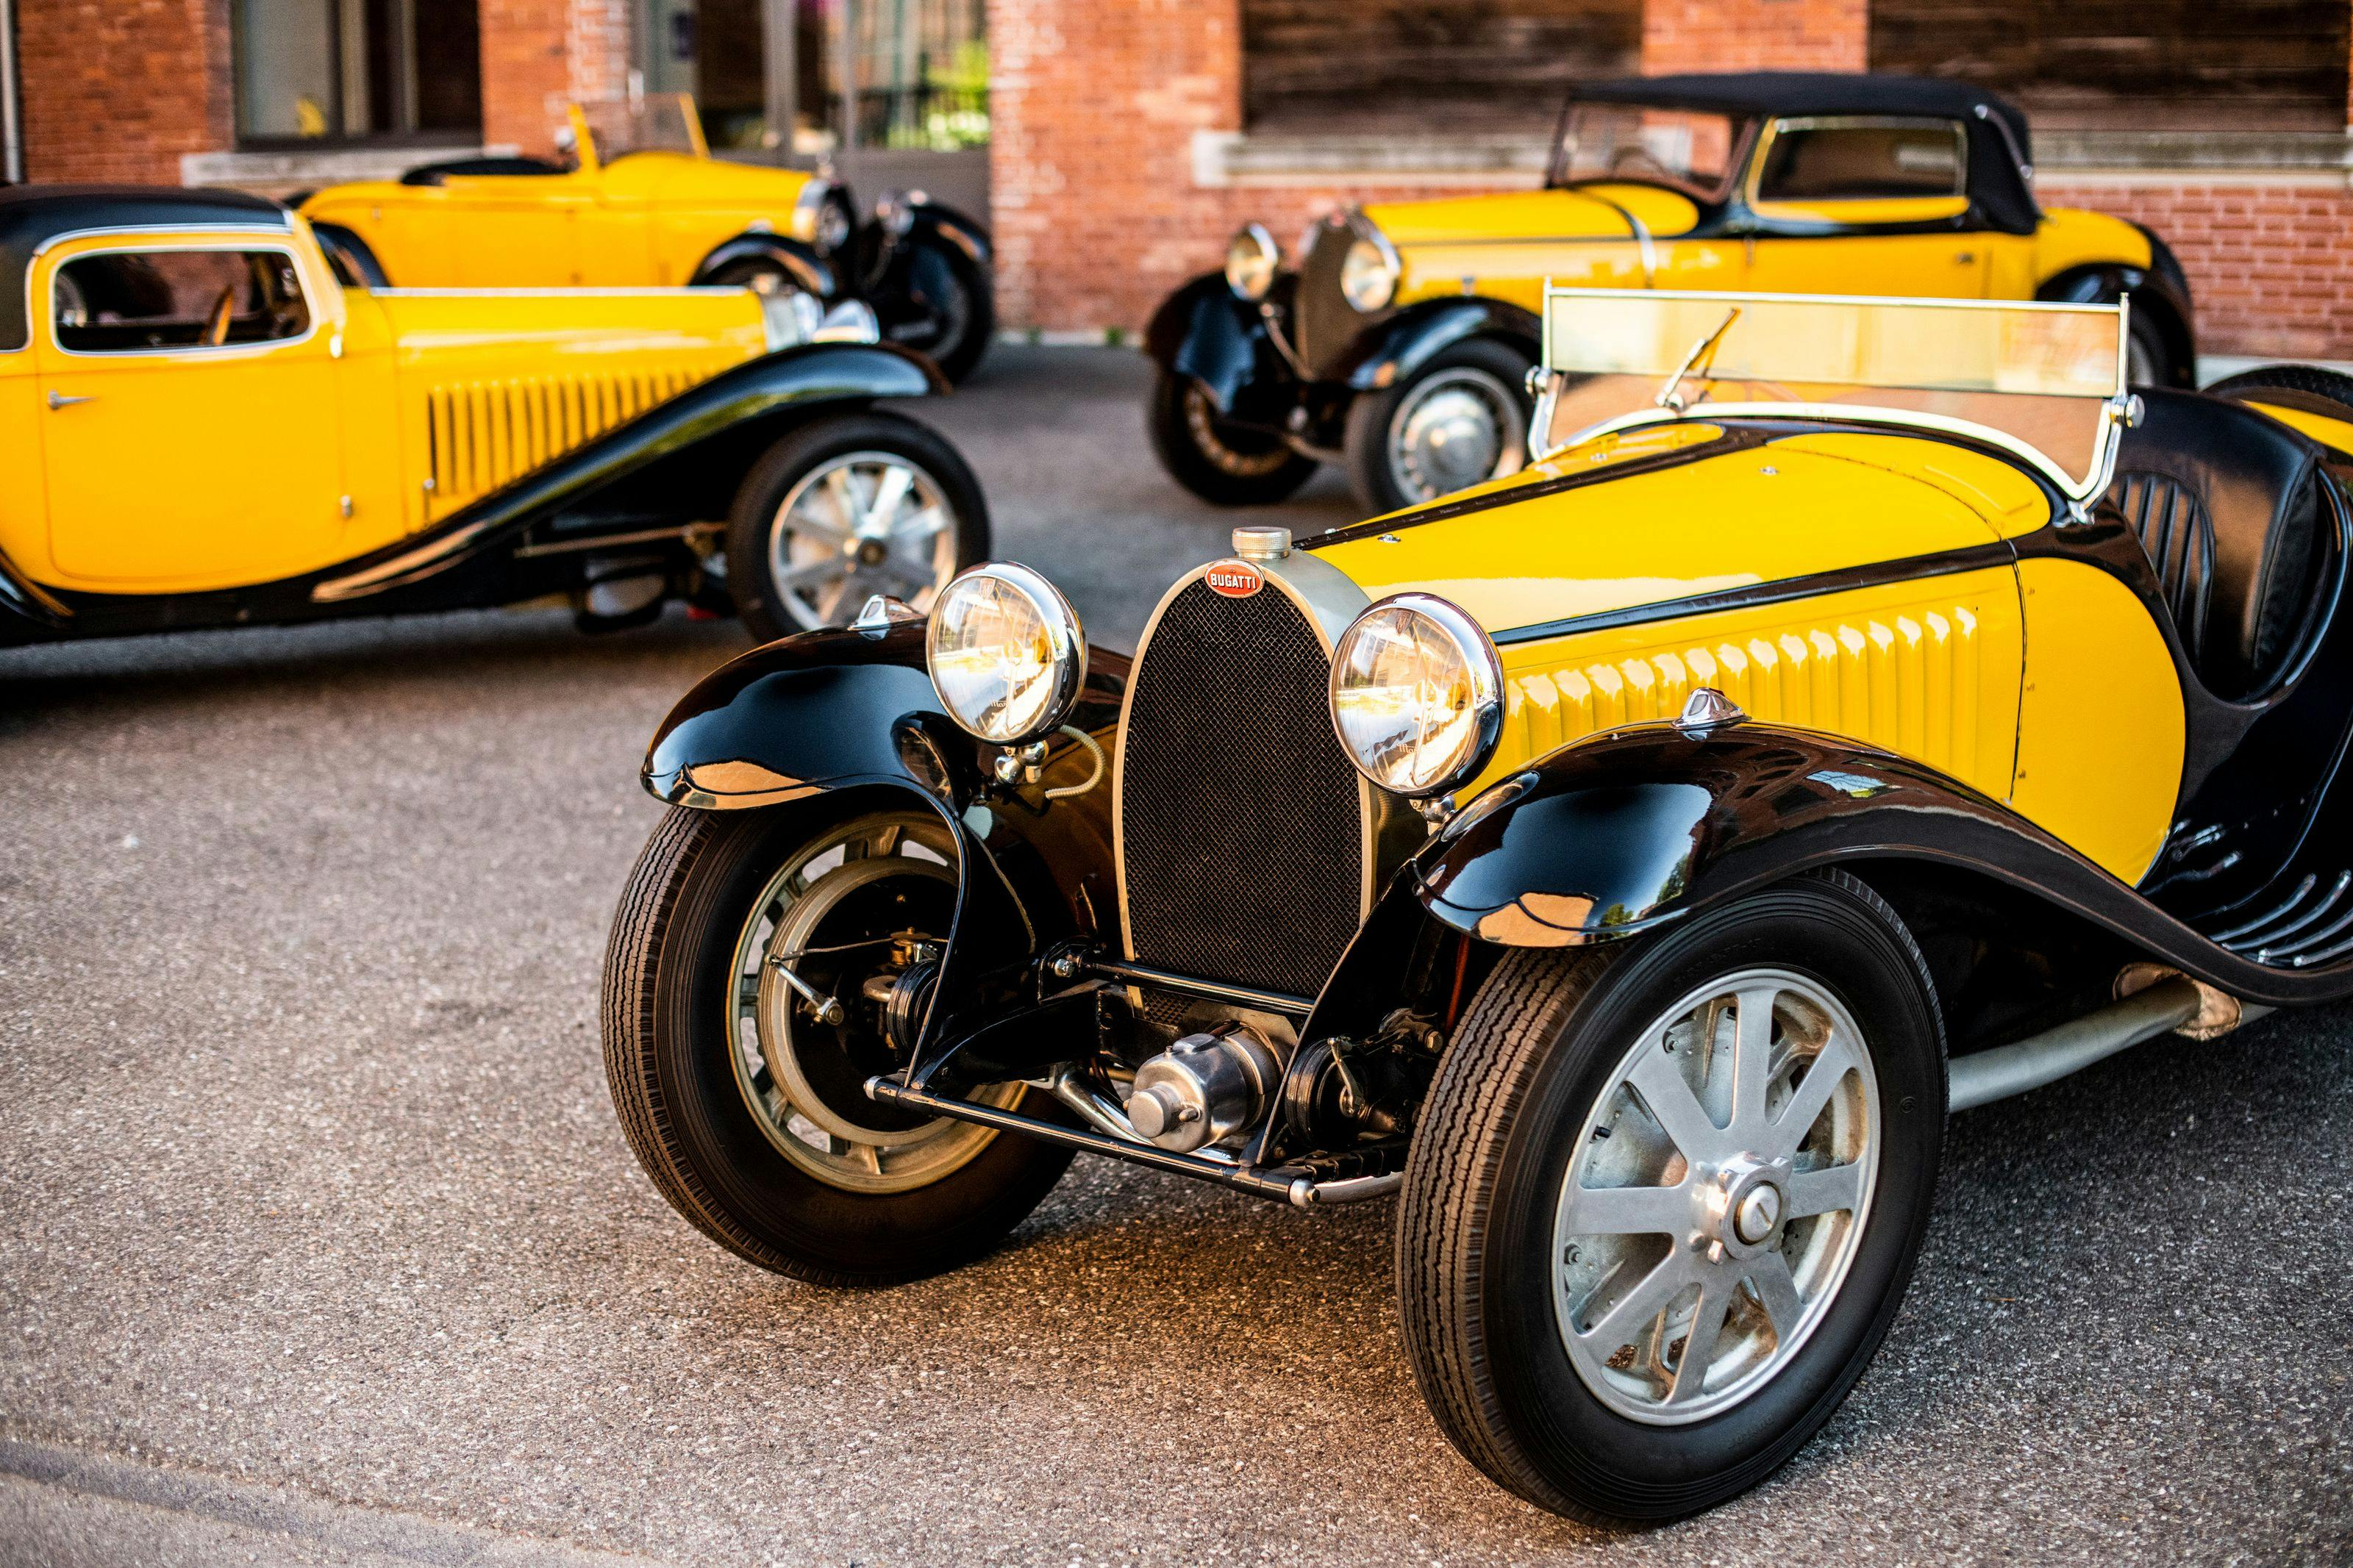 Black and yellow: a timeless combination